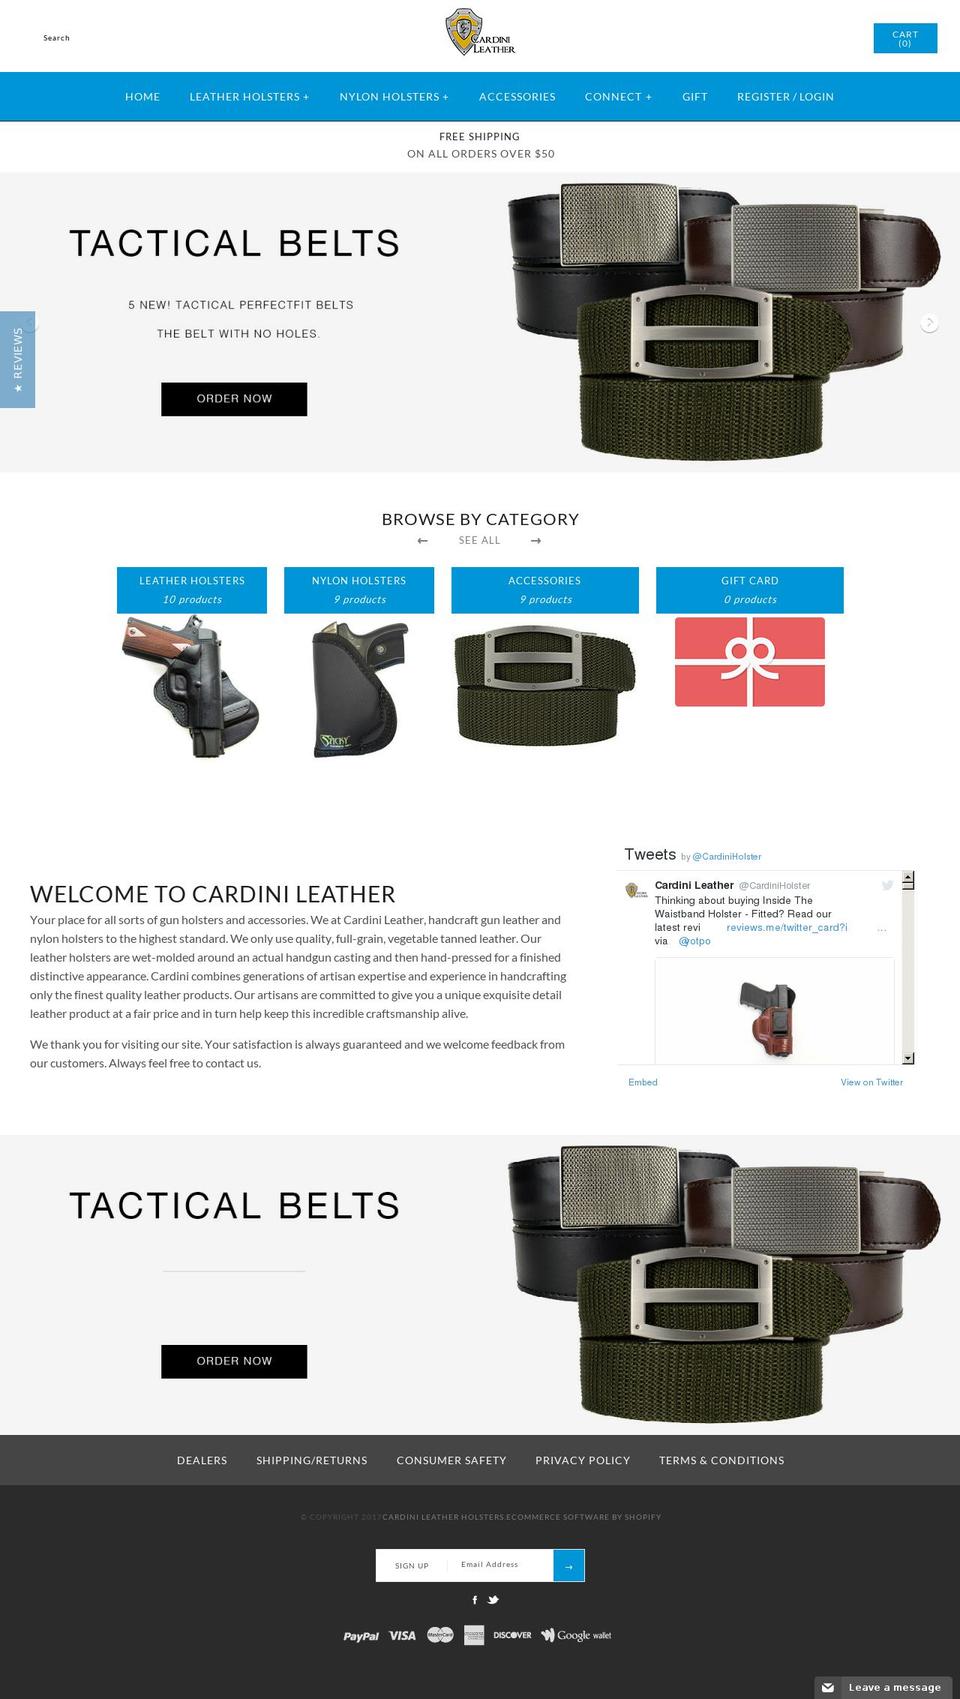 MAX Shopify theme site example cardinileather.com